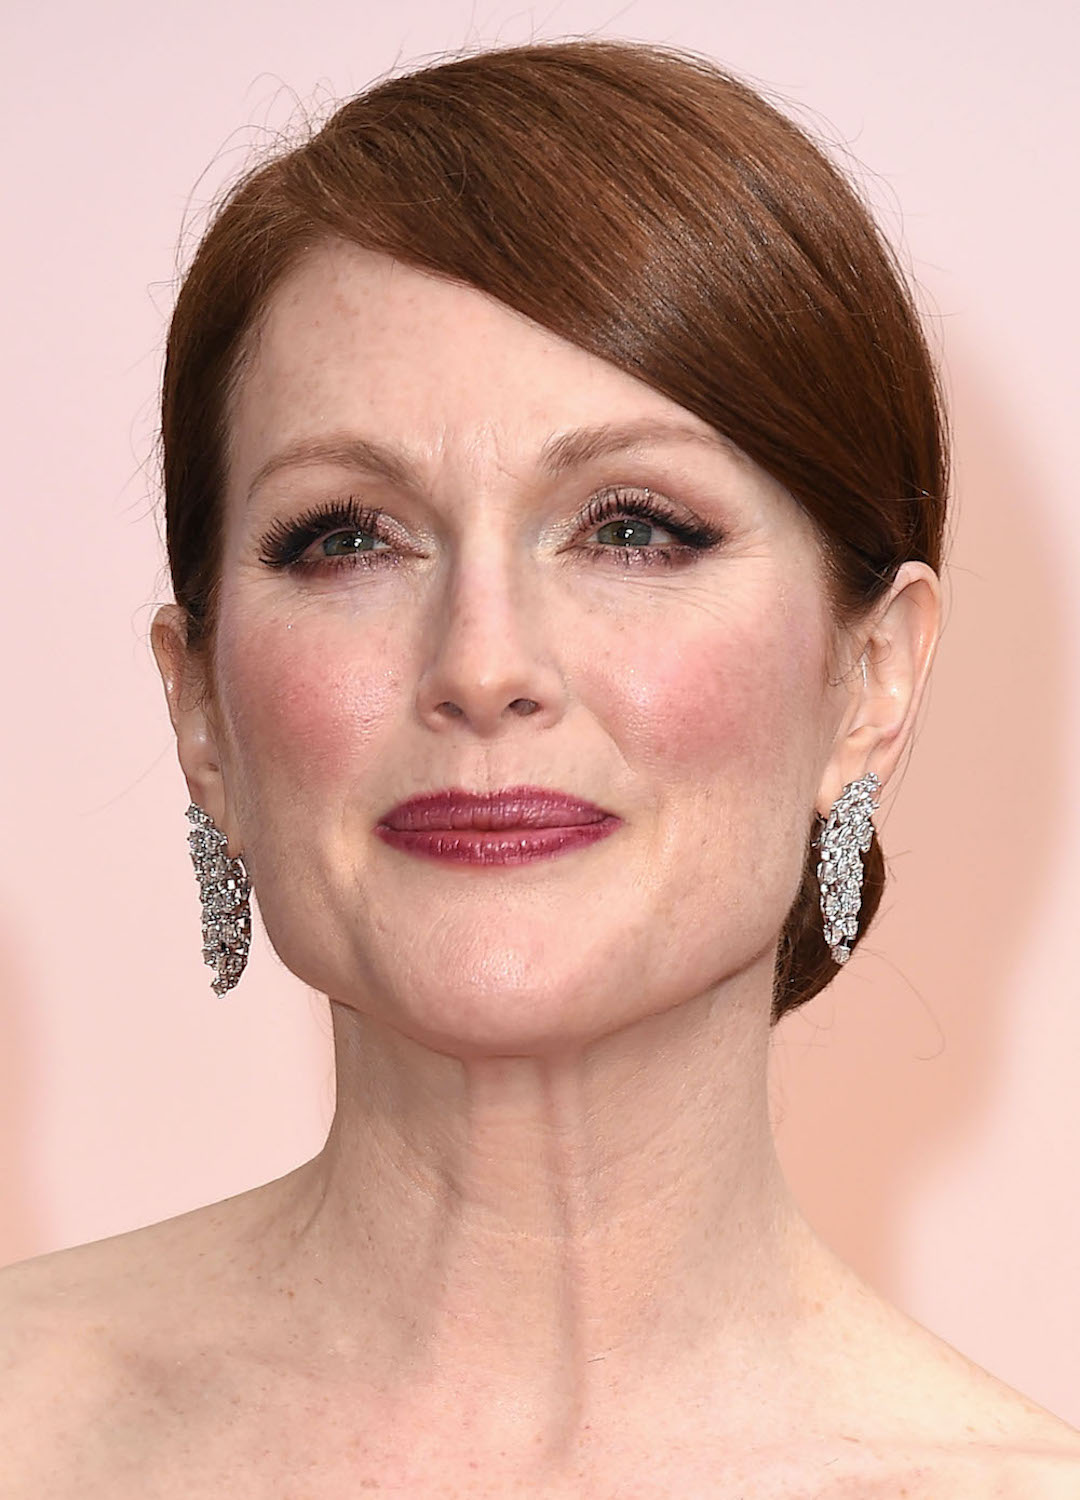 Julianne Moore arrives at the 87th Annual Academy Awards at Hollywood & Highland Center on February 22, 2015 in Hollywood, California